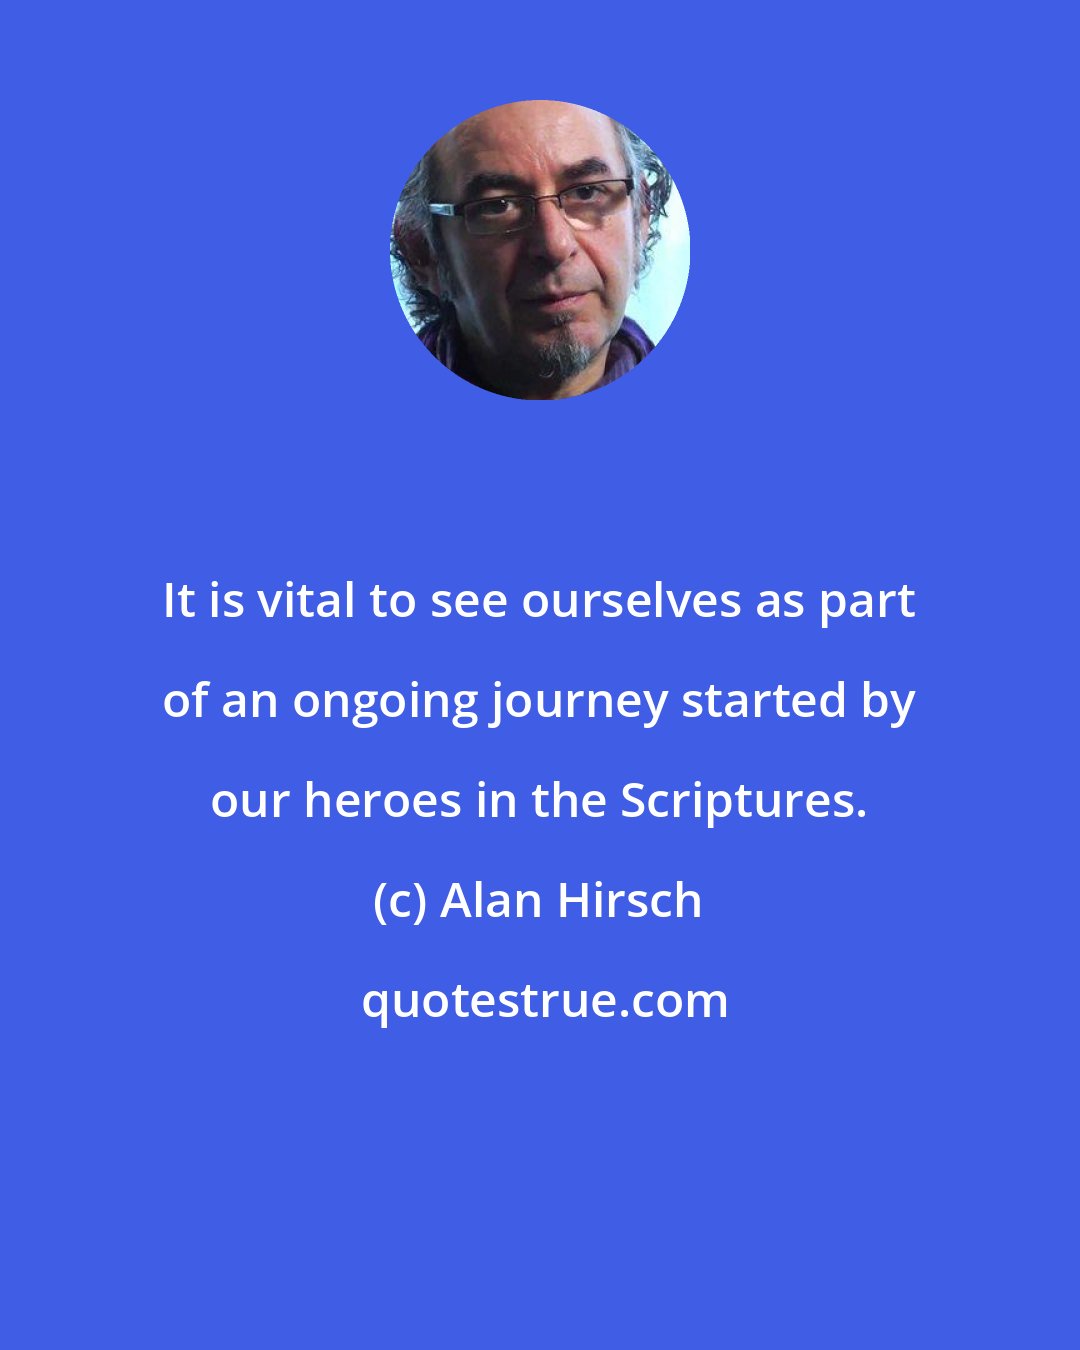 Alan Hirsch: It is vital to see ourselves as part of an ongoing journey started by our heroes in the Scriptures.